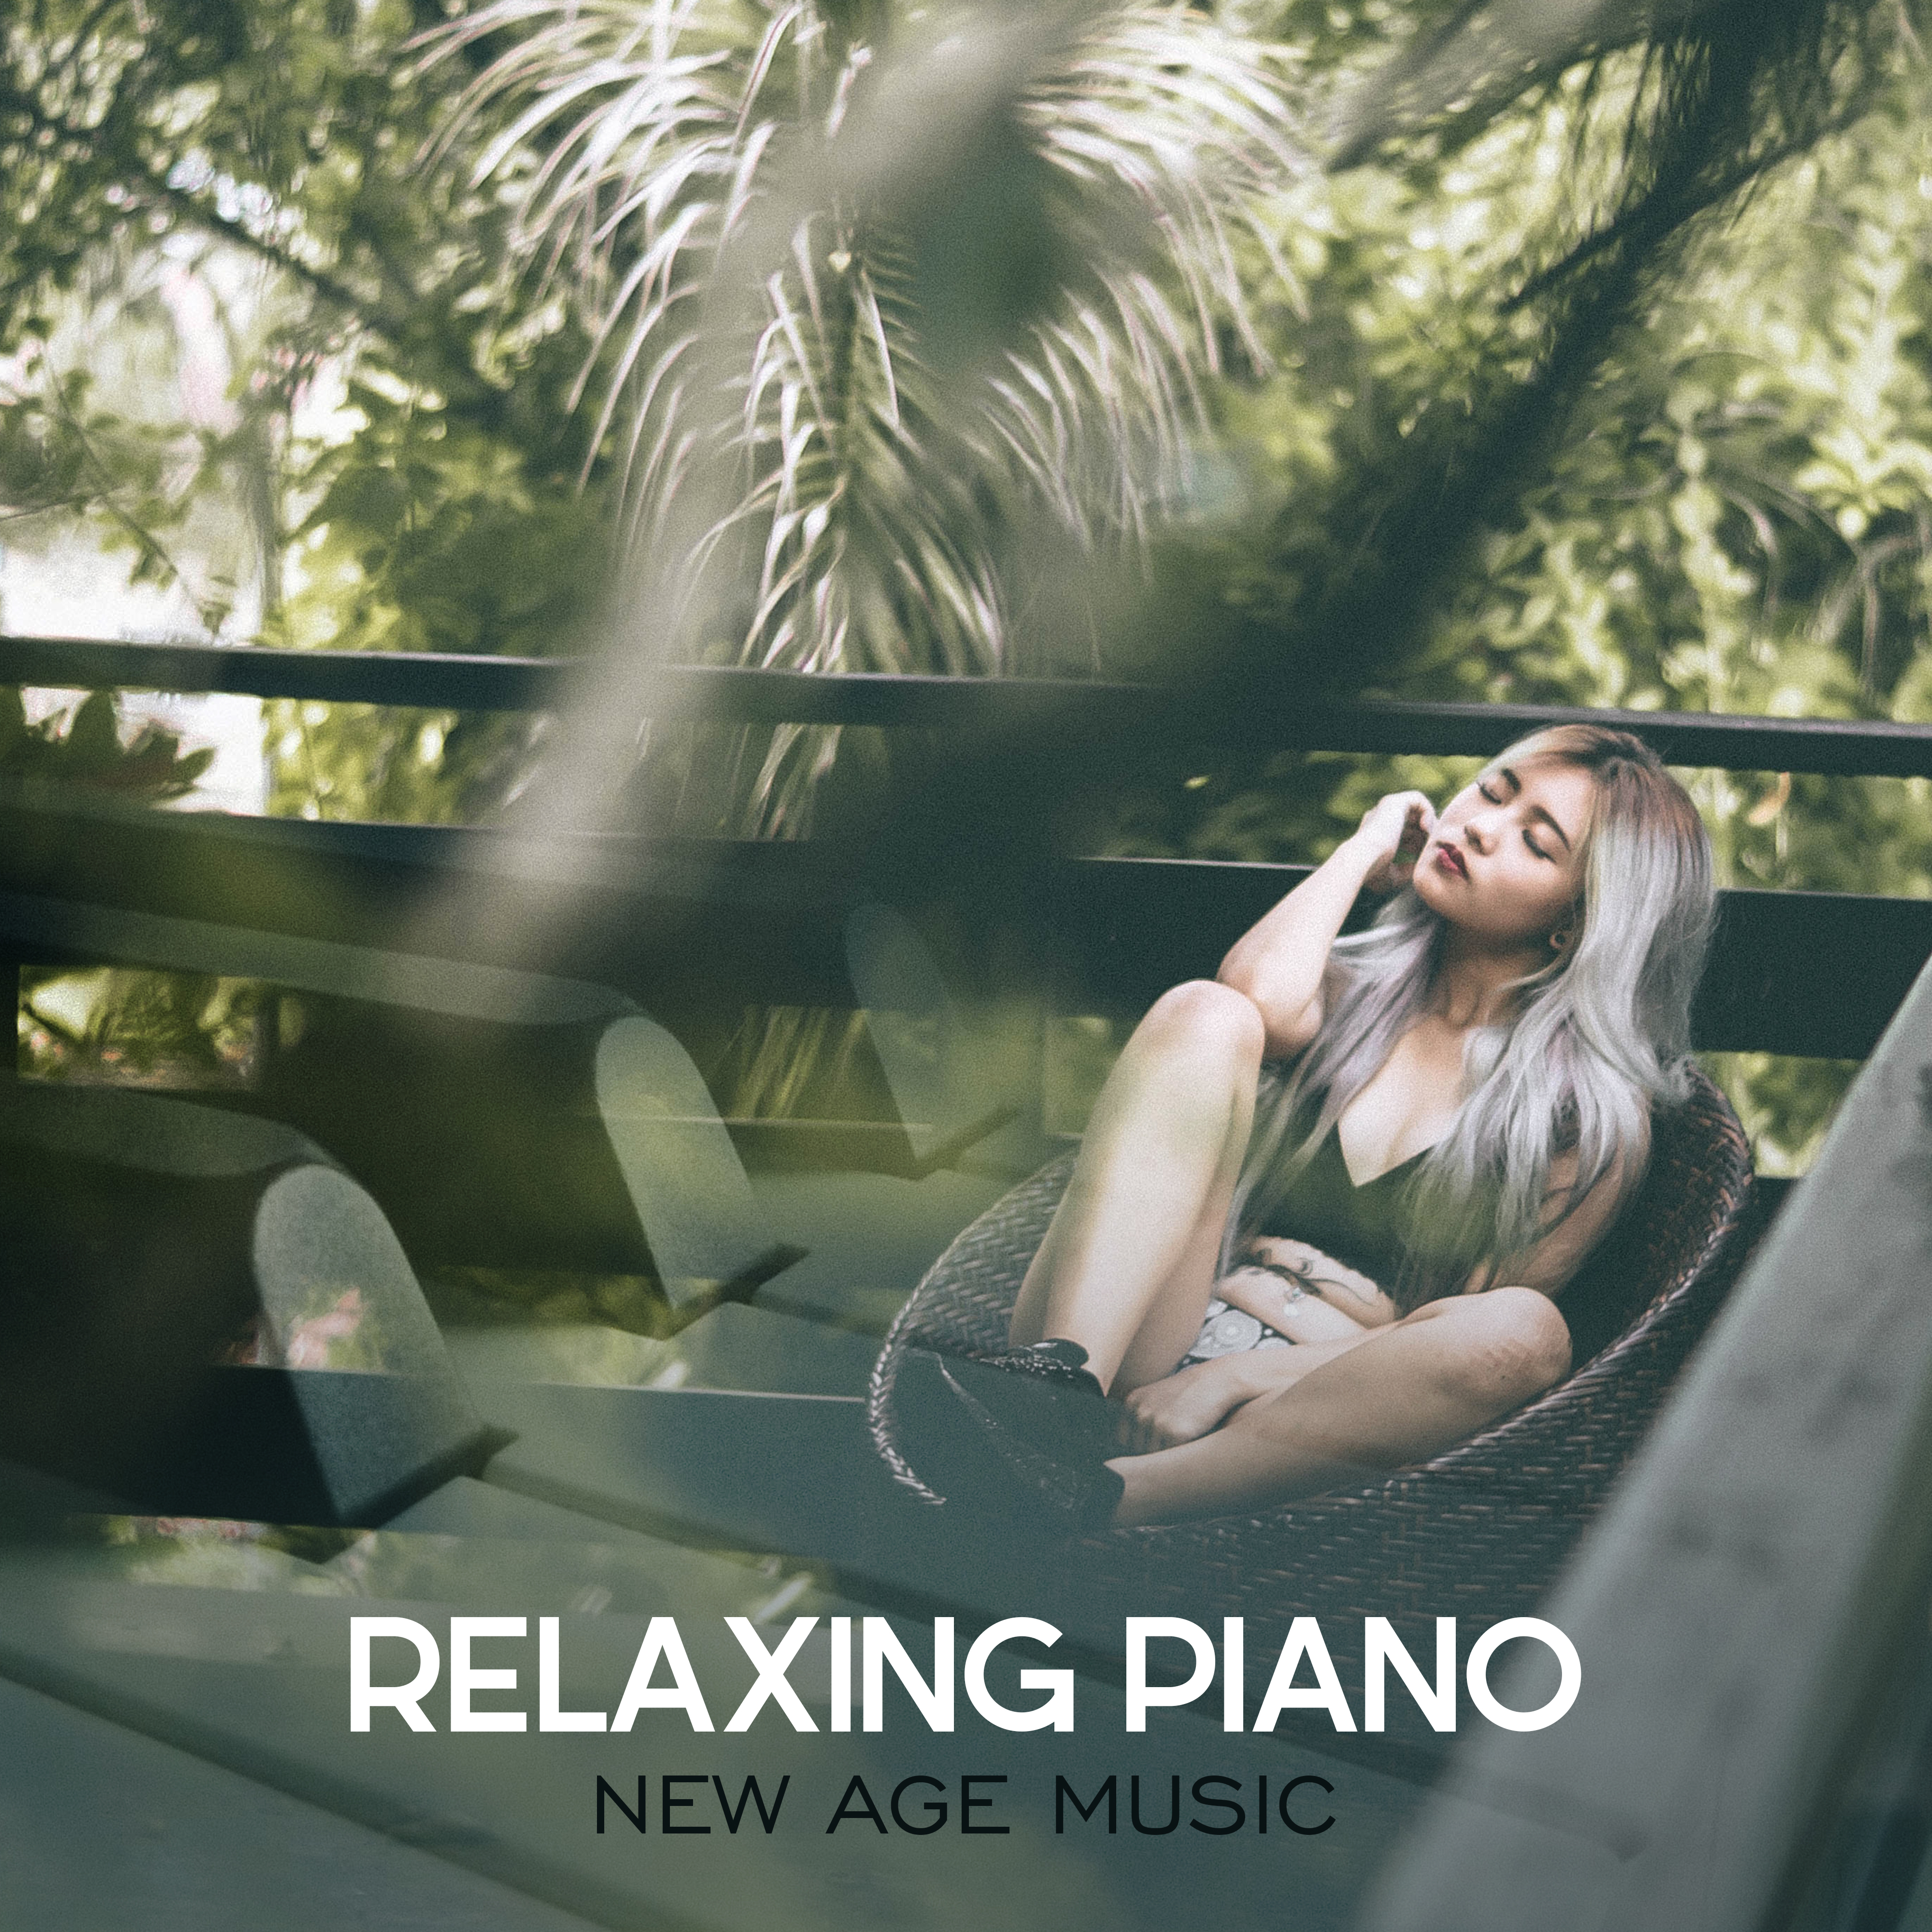 Relaxing Piano New Age Music